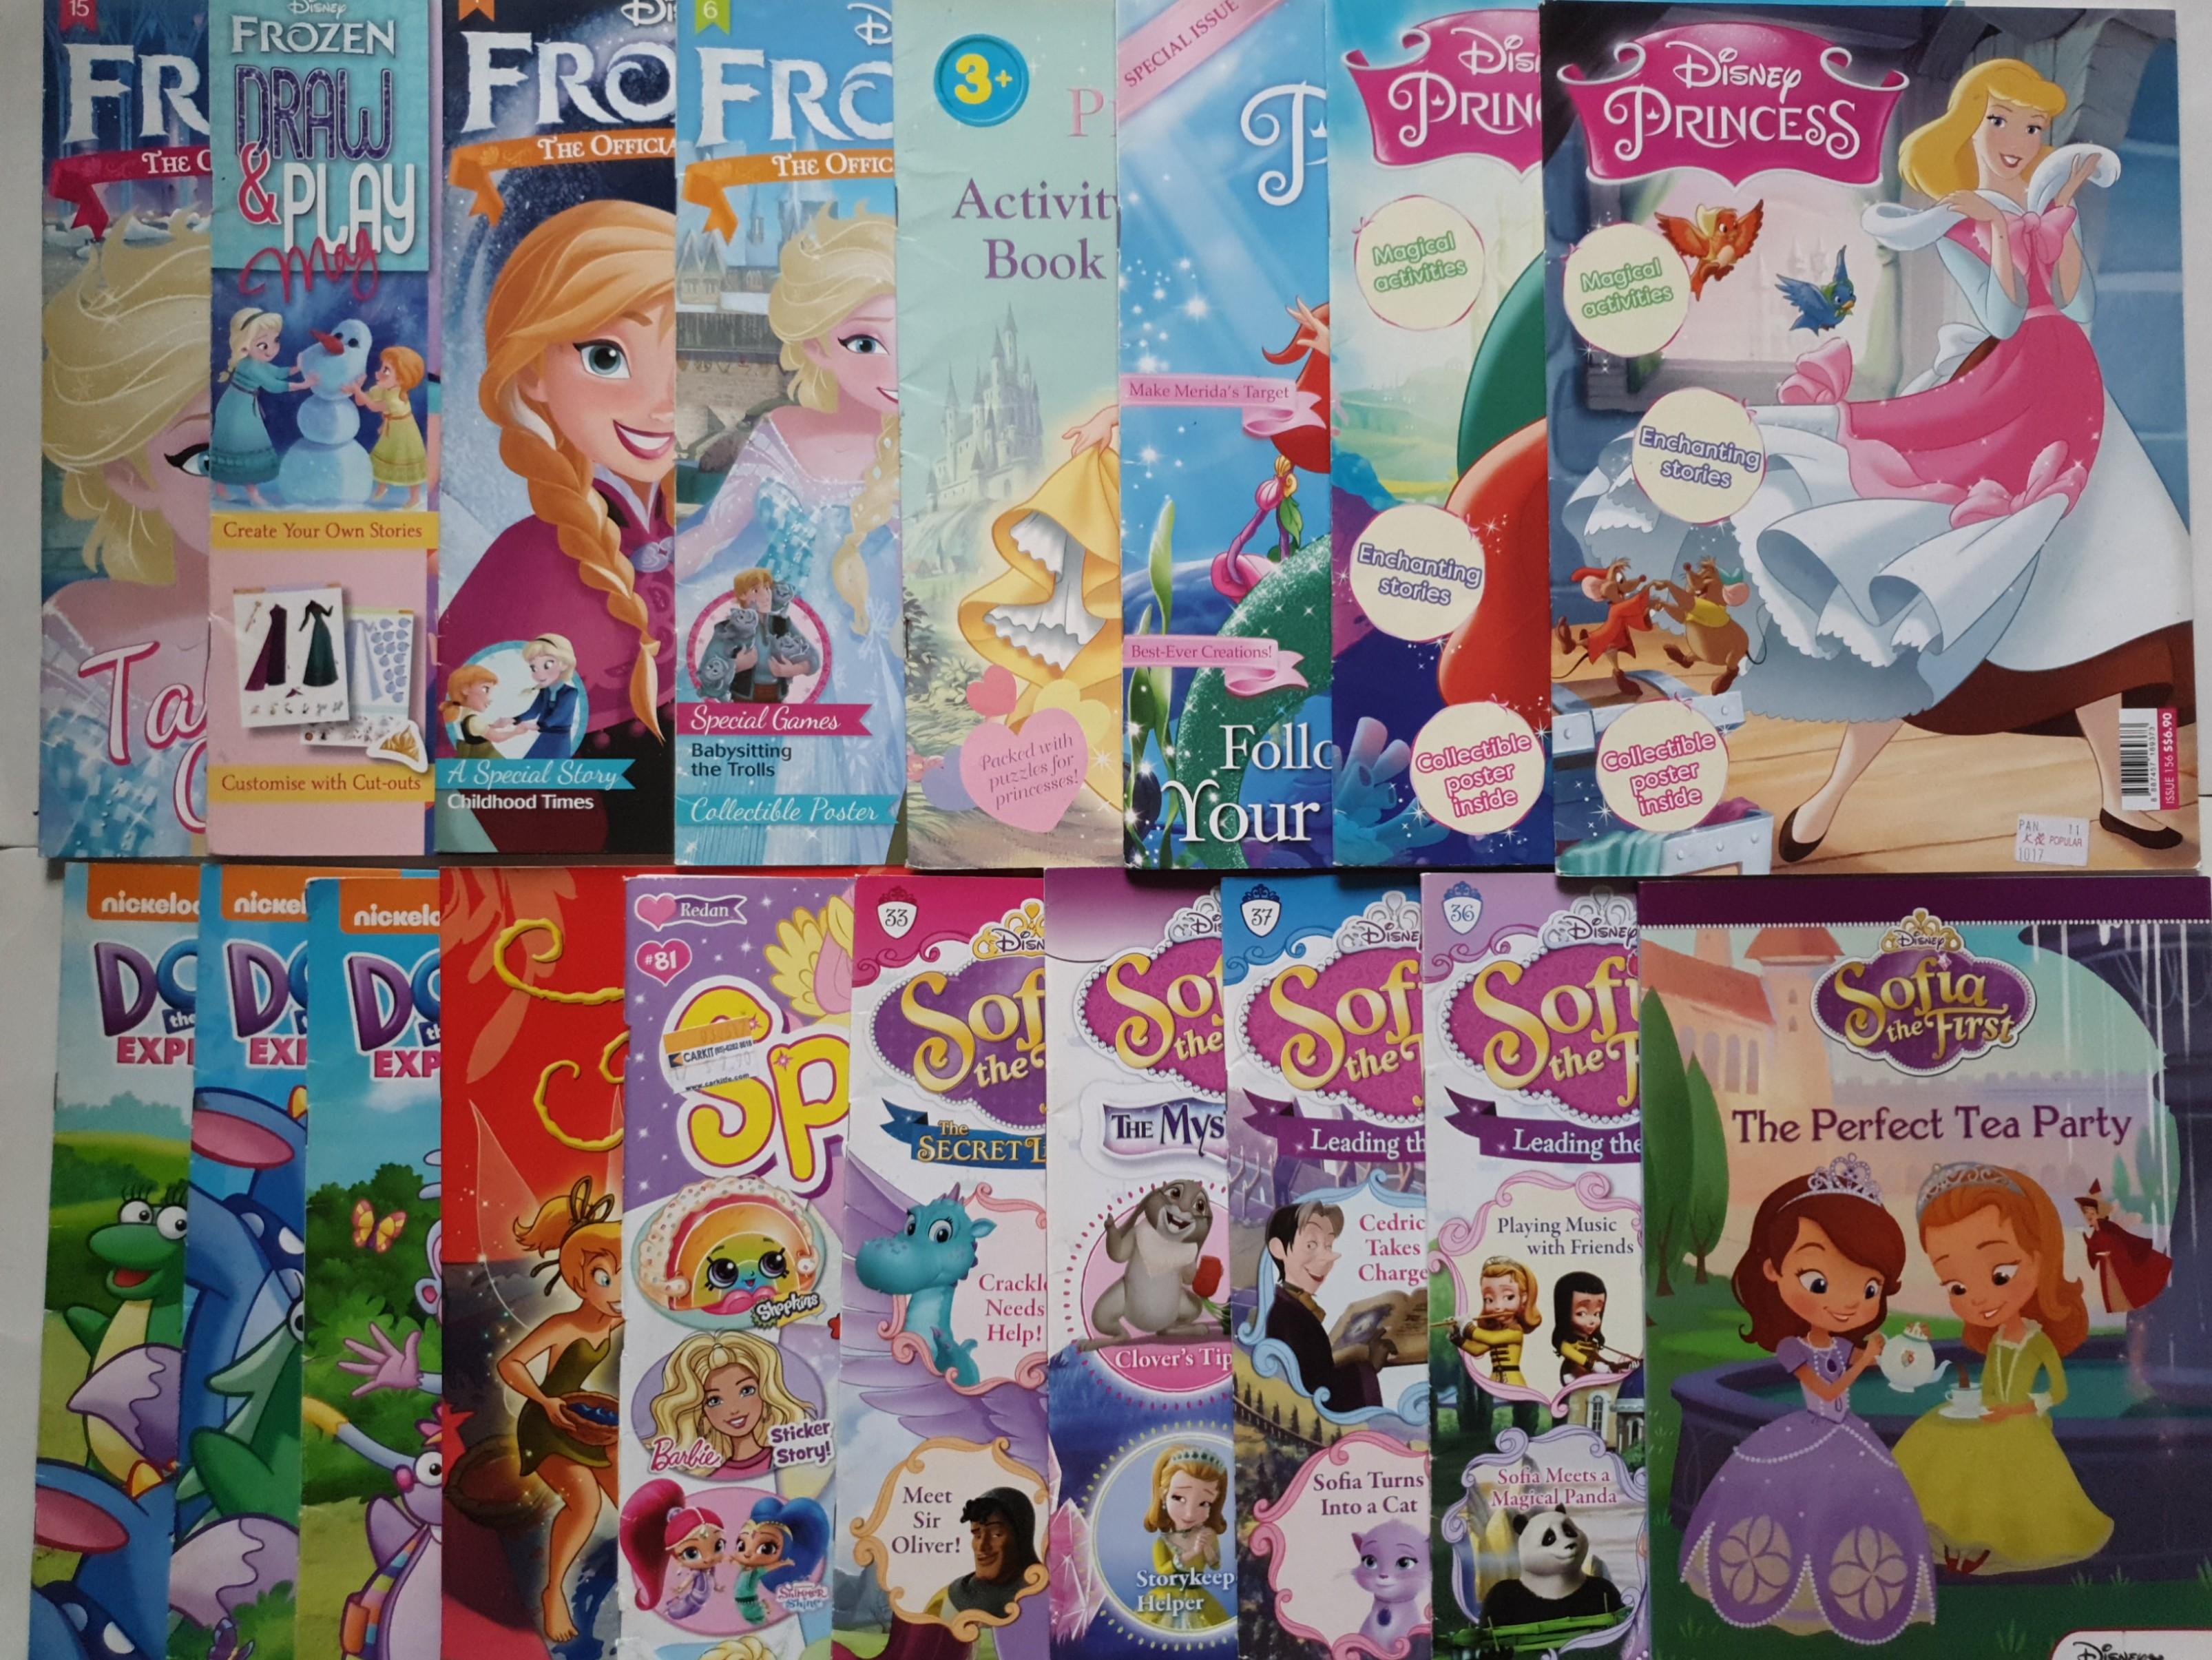 Download New Used Disney Princess Sofia The First Sparkle World Fairies Dora Magazines Coloring Sticker Activity Bks Young Scientists Magazine Dinosaur Hobbies Toys Books Magazines Assessment Books On Carousell